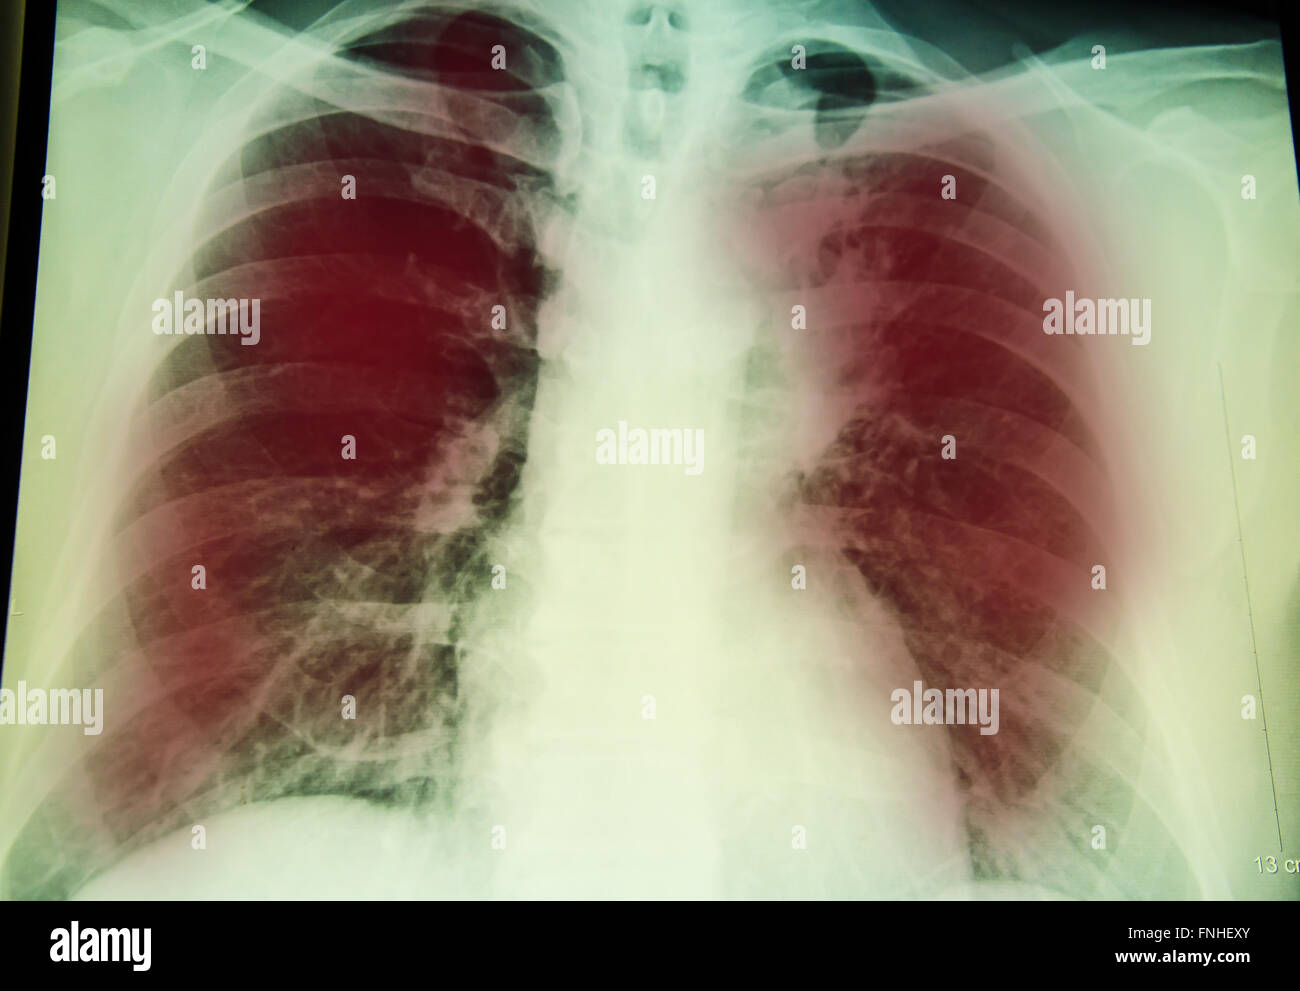 chest x-ray examination for diagnosis Pulmonary tuberculosis infection with  both  lung Stock Photo